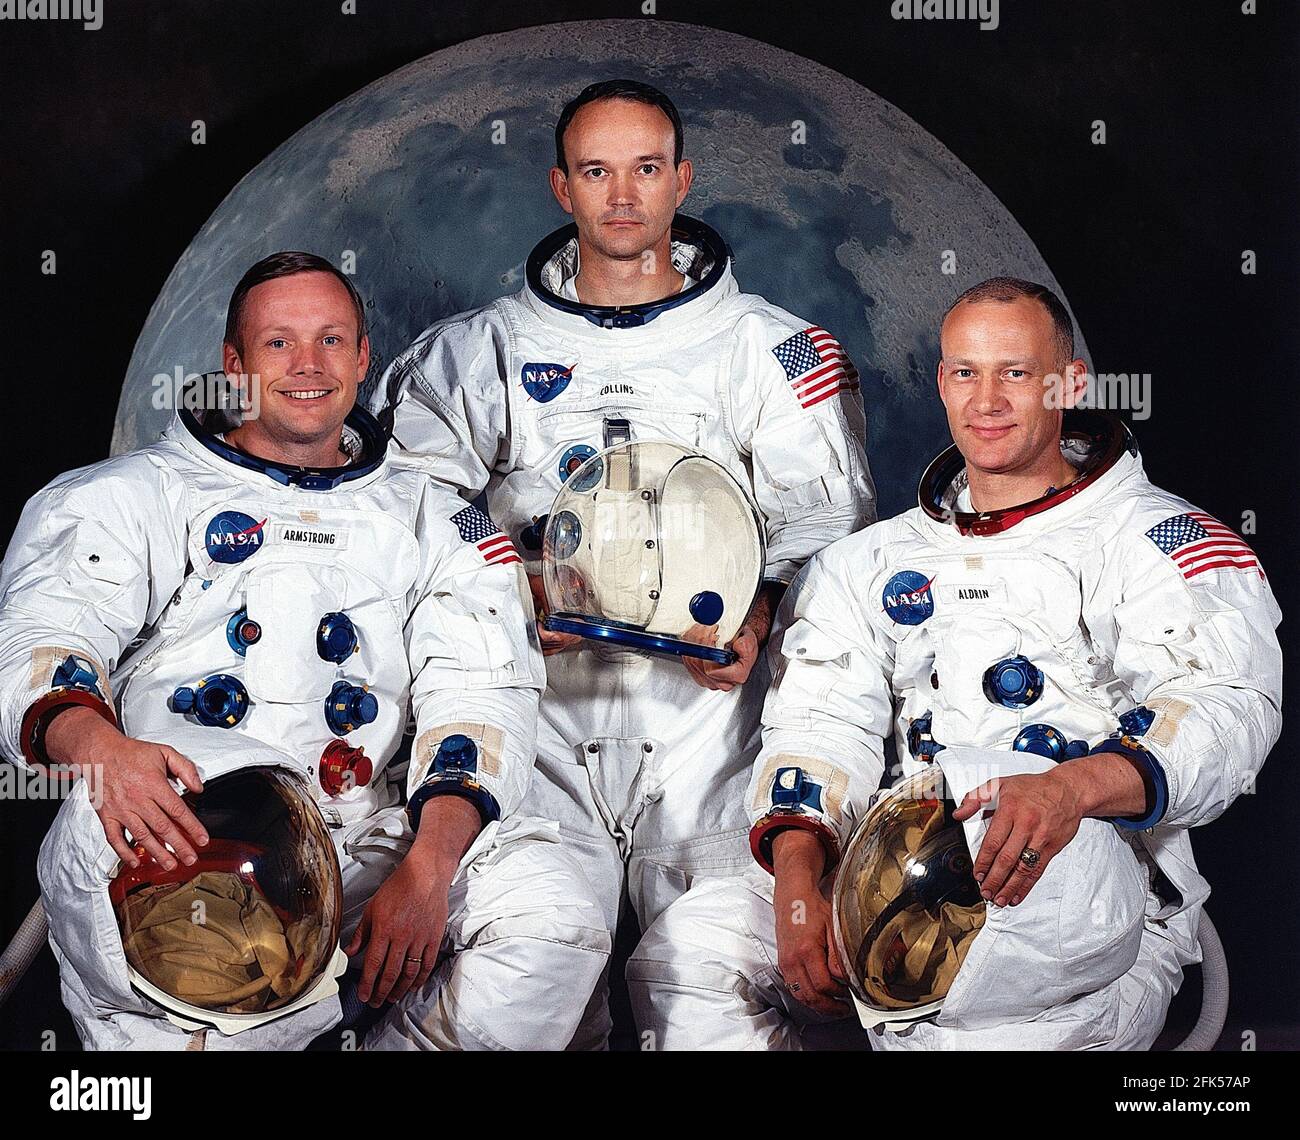 File photo - Houston, TX - -- Portrait of the prime crew of the Apollo 11 lunar landing mission taken on May 1, 1969. From left to right they are: Commander, Neil A. Armstrong, Command Module Pilot, Michael Collins, and Lunar Module Pilot, Edwin E. Aldrin Jr. On July 20th 1969 at 4:18 PM, EDT the Lunar Module 'Eagle' landed in a region of the Moon called the Mare Tranquillitatis, also known as the Sea of Tranquillity. After securing his spacecraft, Armstrong radioed back to earth: 'Houston, Tranquility Base here, the Eagle has landed'. At 10:56 p.m. that same evening and witnessed by a worldwi Stock Photo